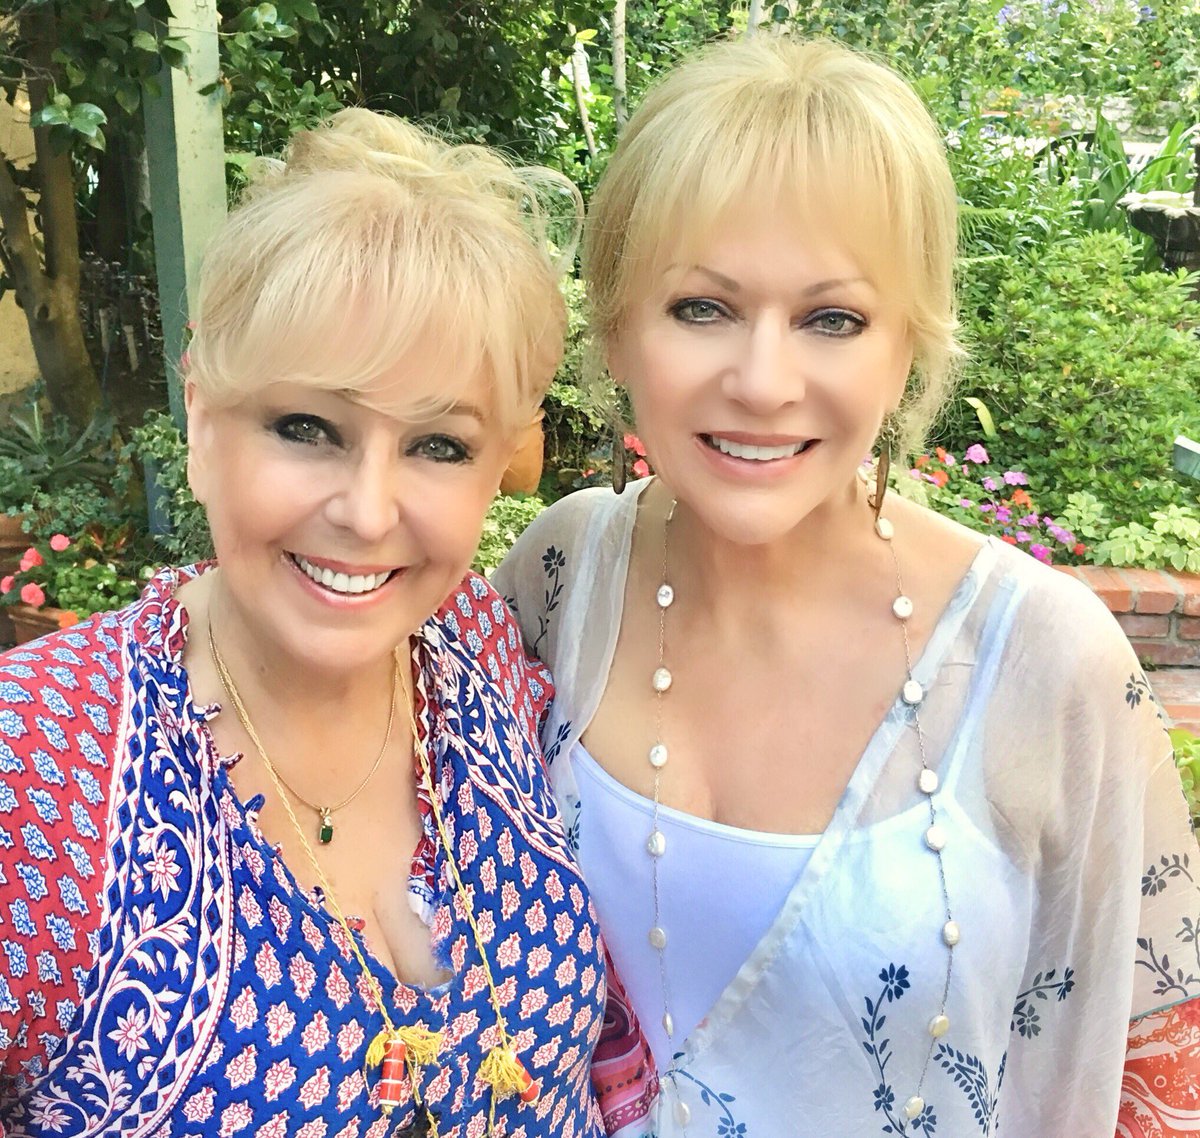 We hope you had a wonderful Fourth of July holiday. We spent the day at our cousin @CamClarkeVoices annual celebration. The weather was perfect, we were surounded by family and friends, the food was yummy and we all got to sing songs late into the evening. So fun!